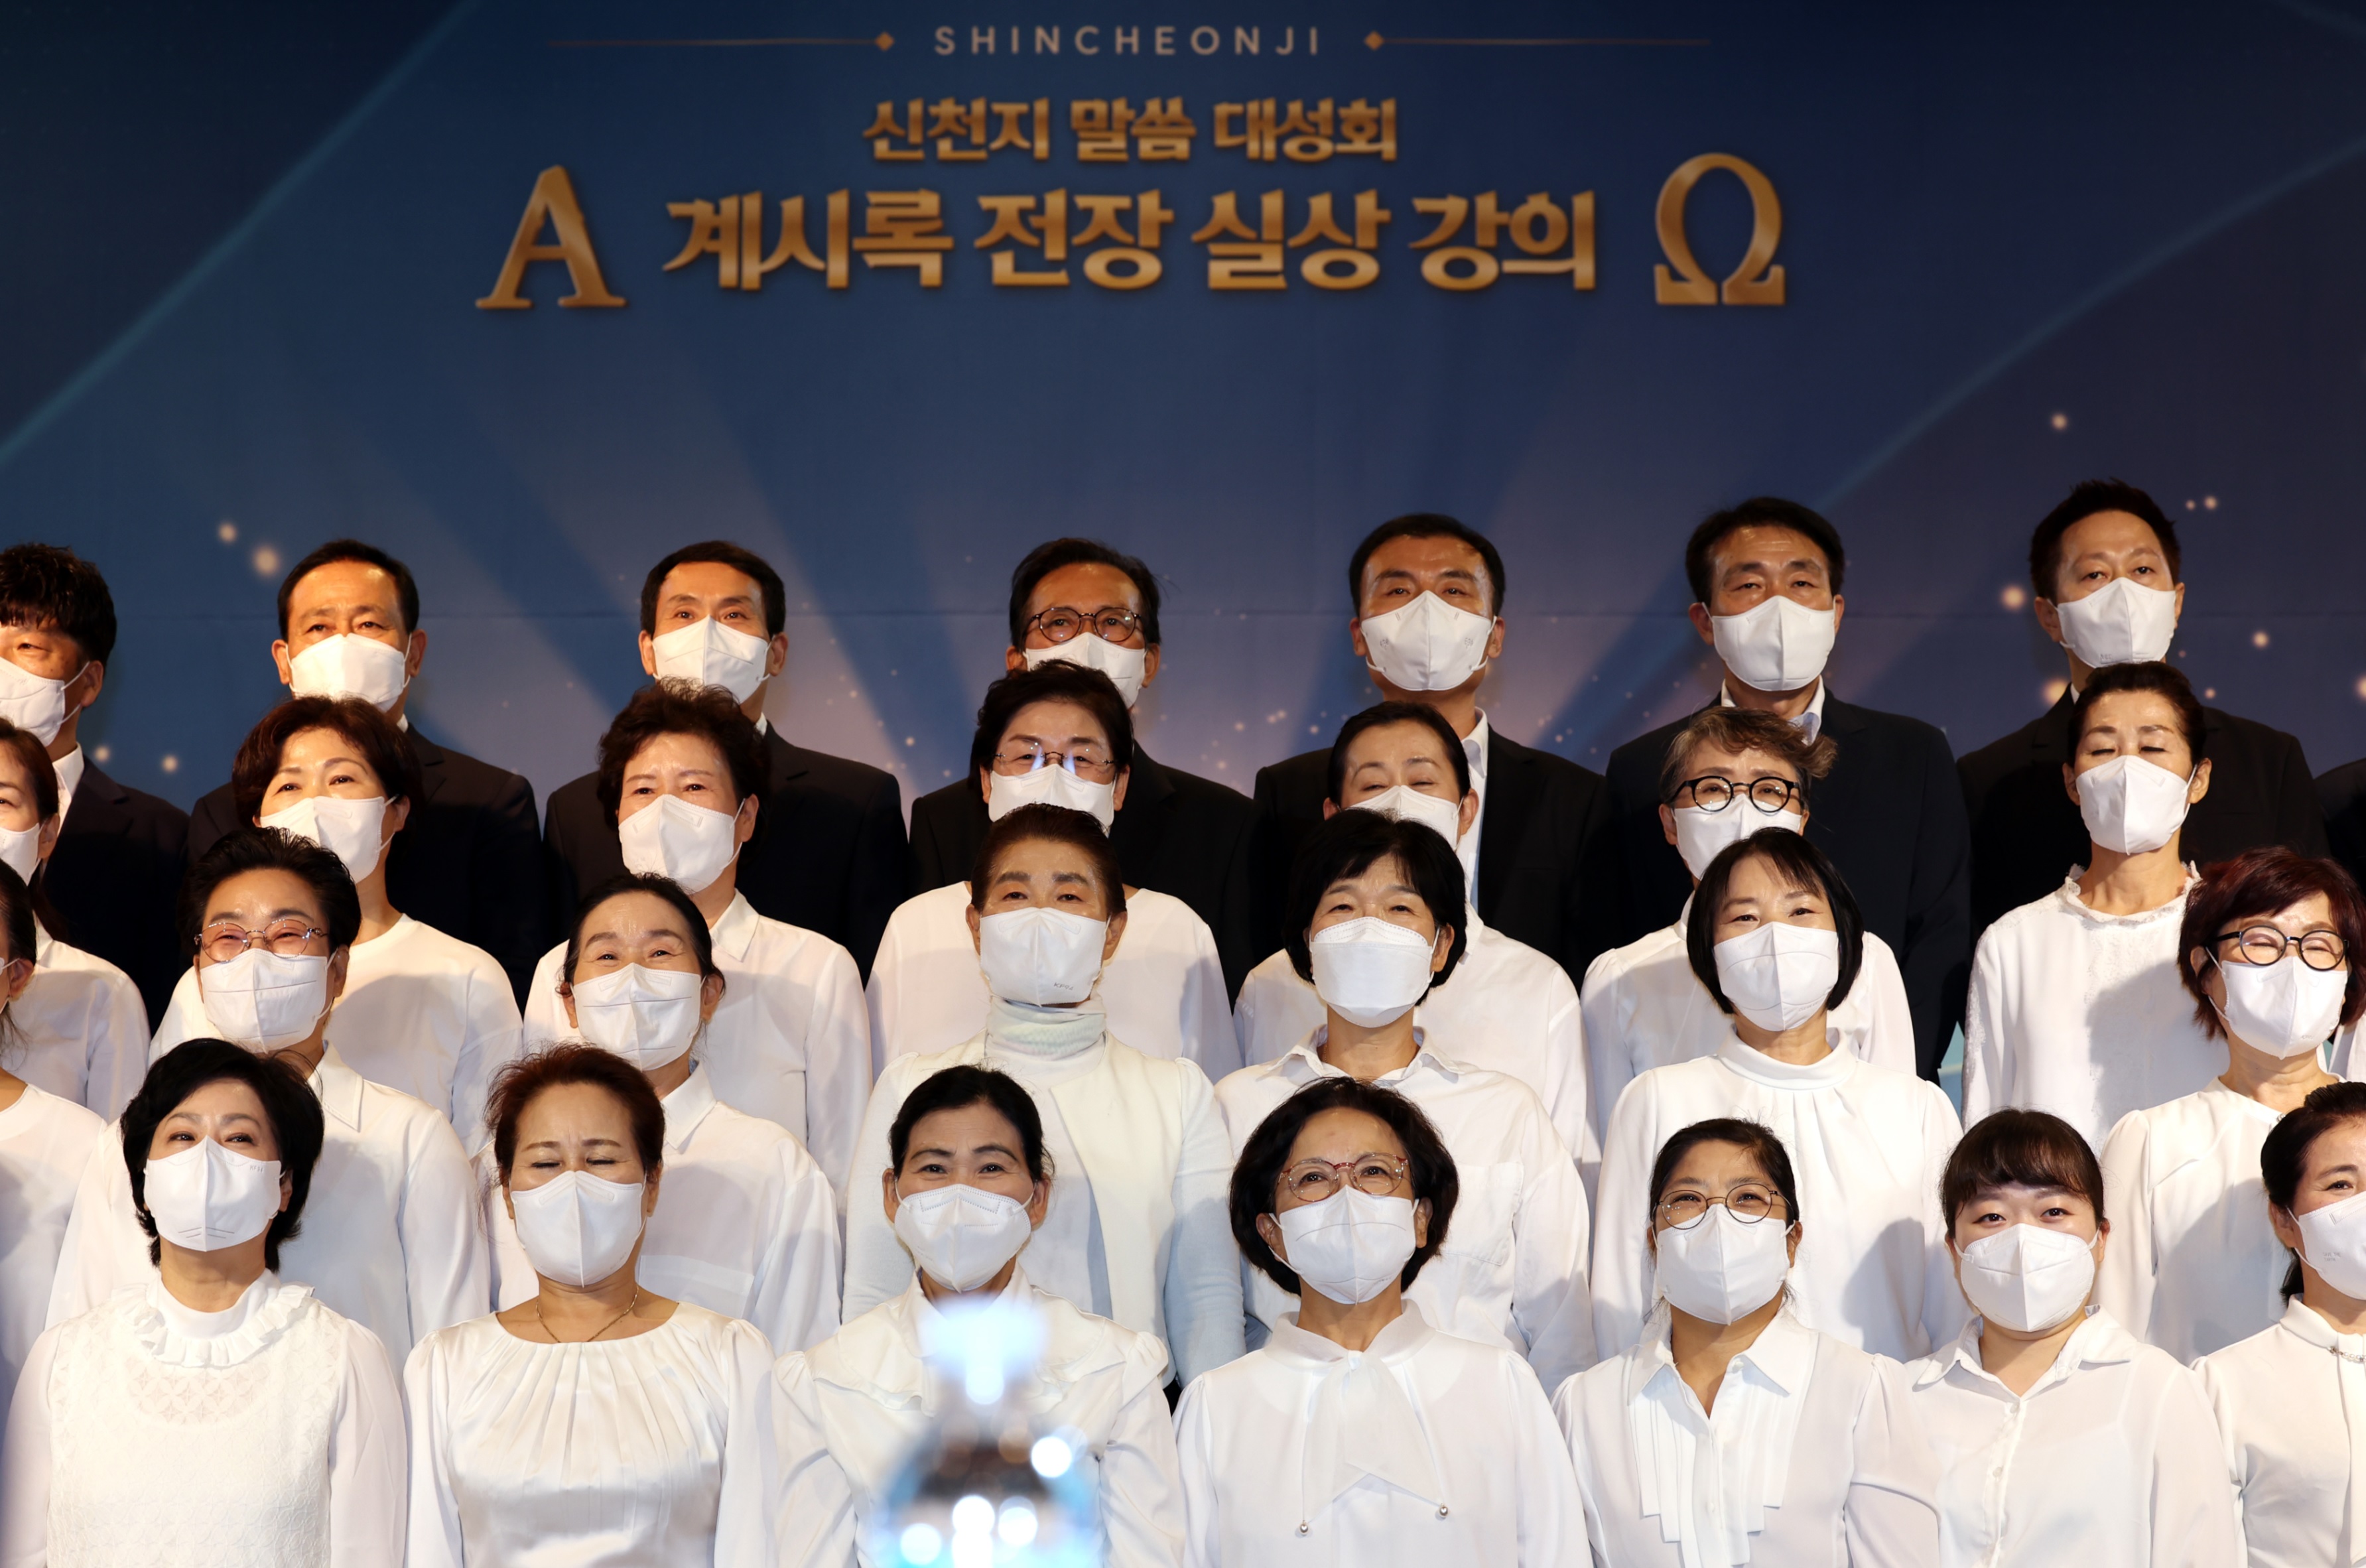 A choirs special performance at the Shincheonjis Bible Seminar on Oct 7